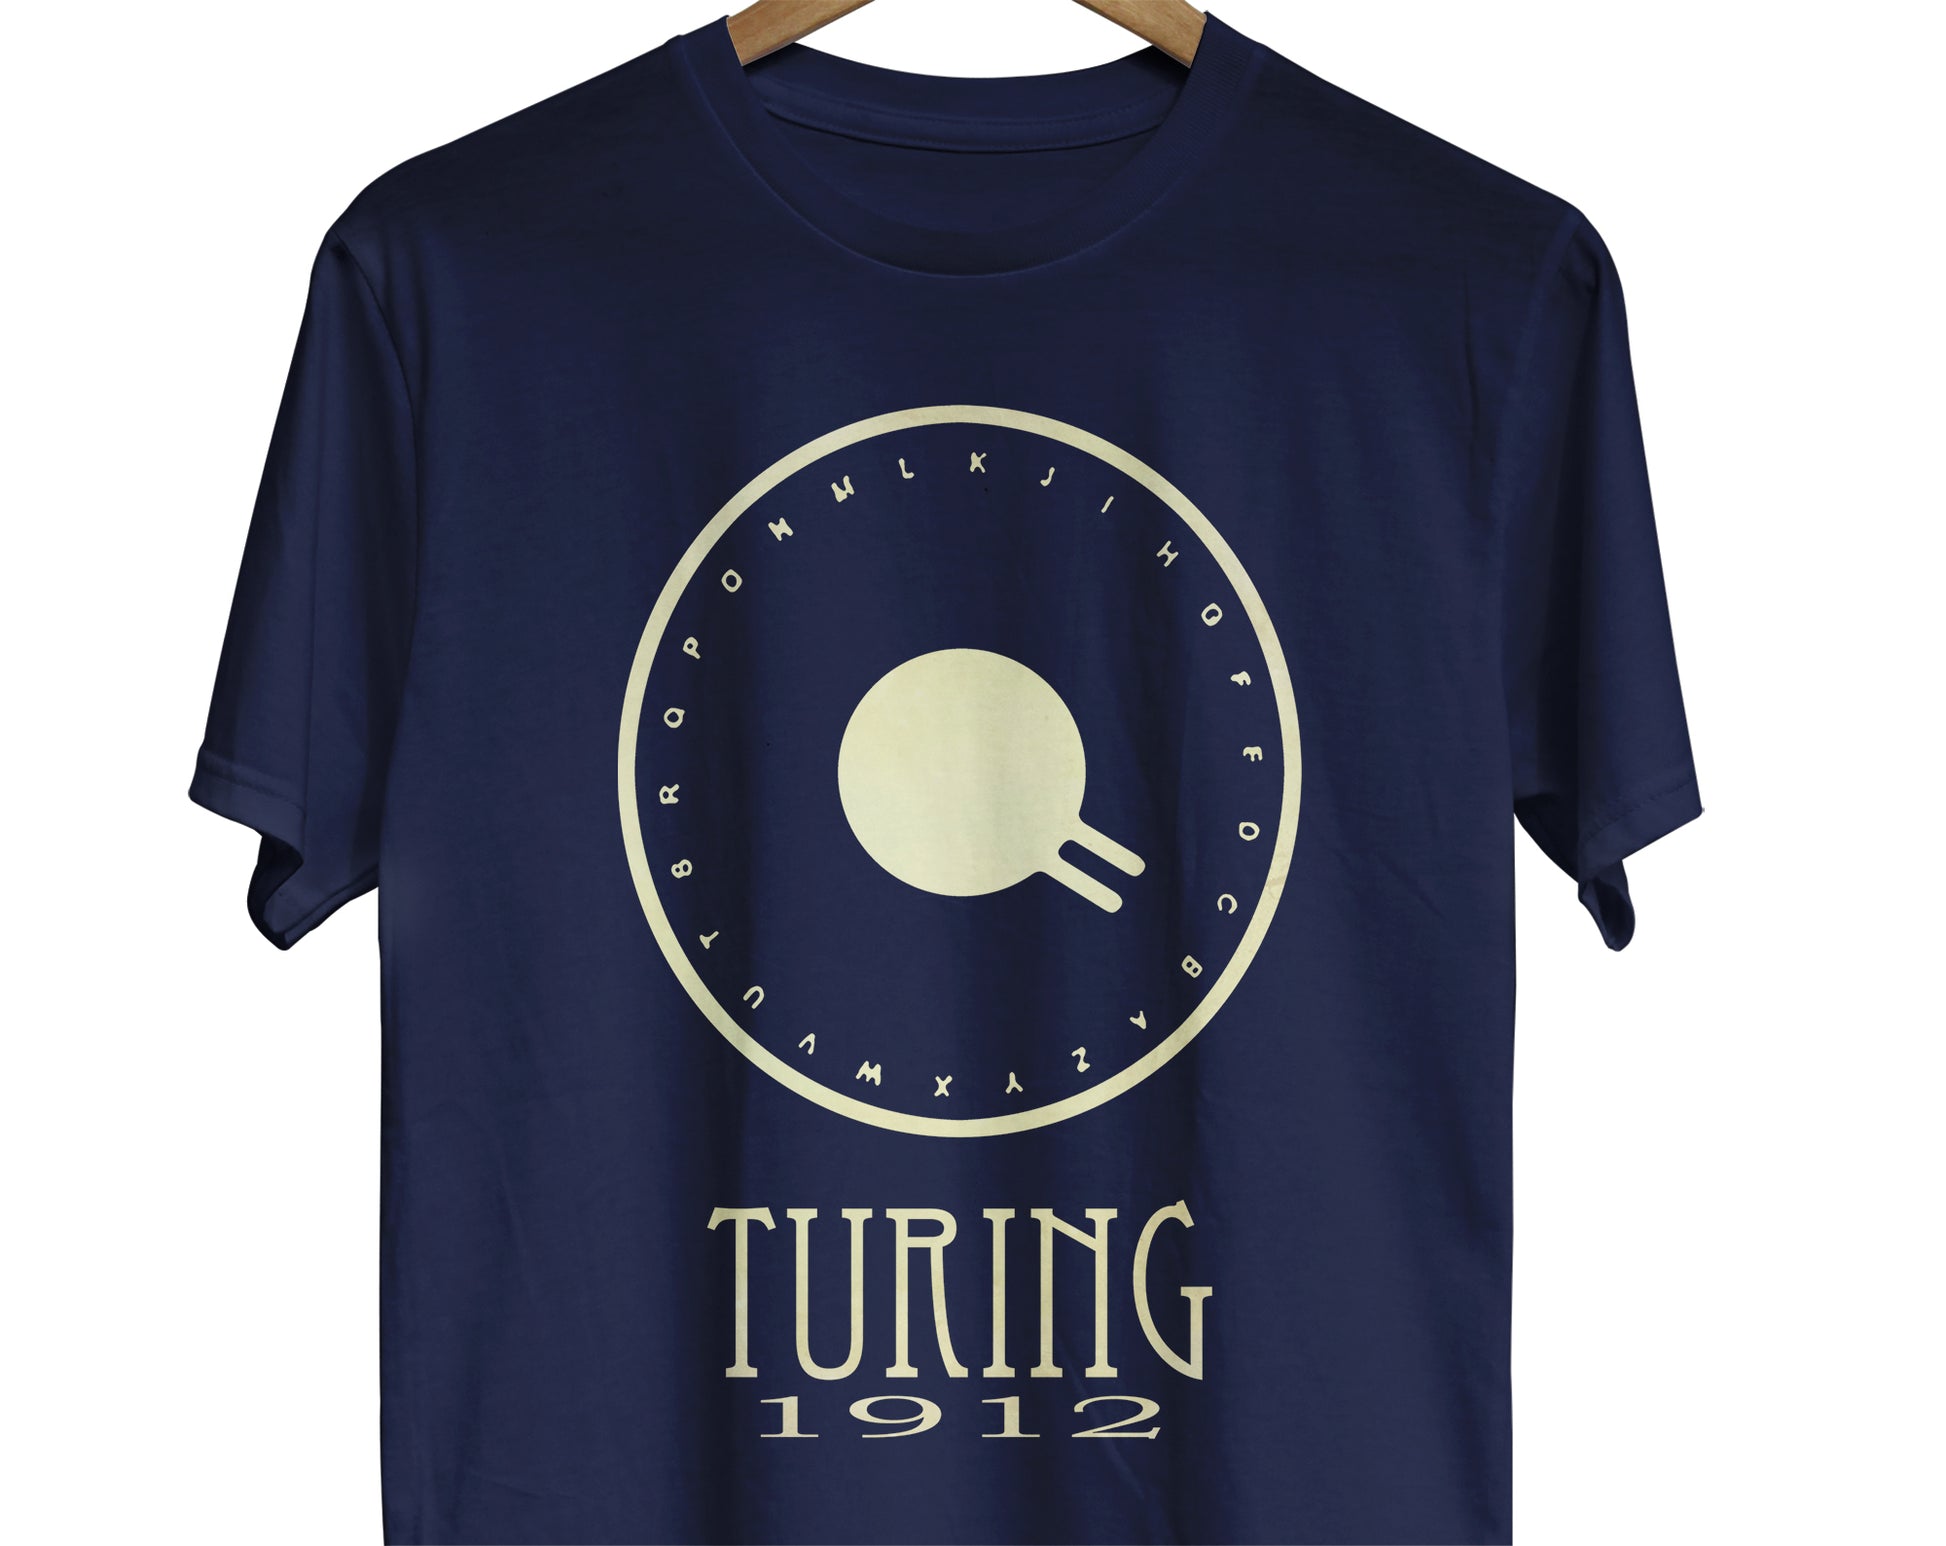 Alan Turing computer science shirt with a design representing his code breaking work